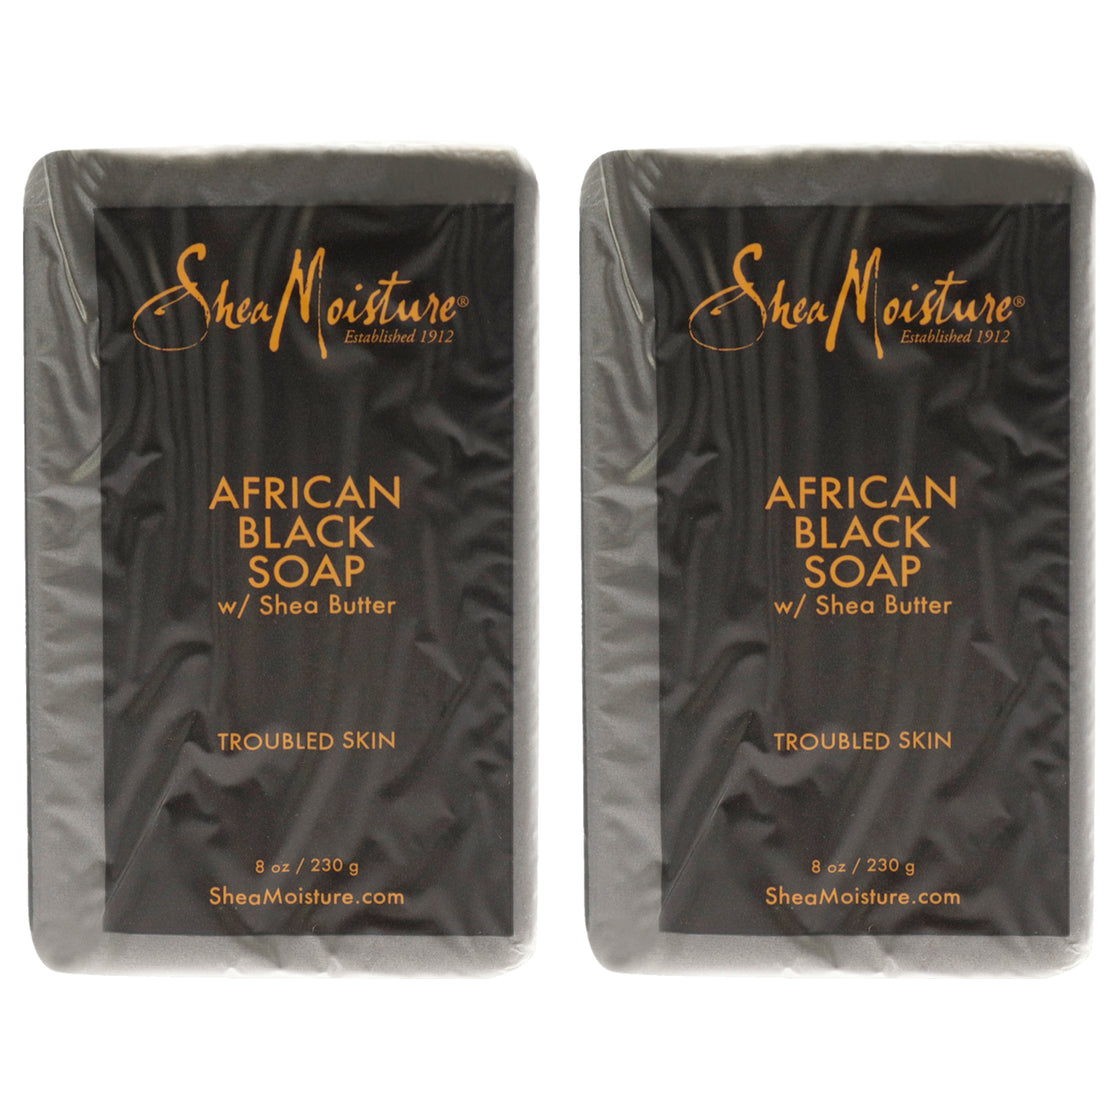 African Black Soap Bar Acne Prone & Troubled Skin - Pack of 2 by Shea Moisture for Unisex - 8 oz Bar Soap